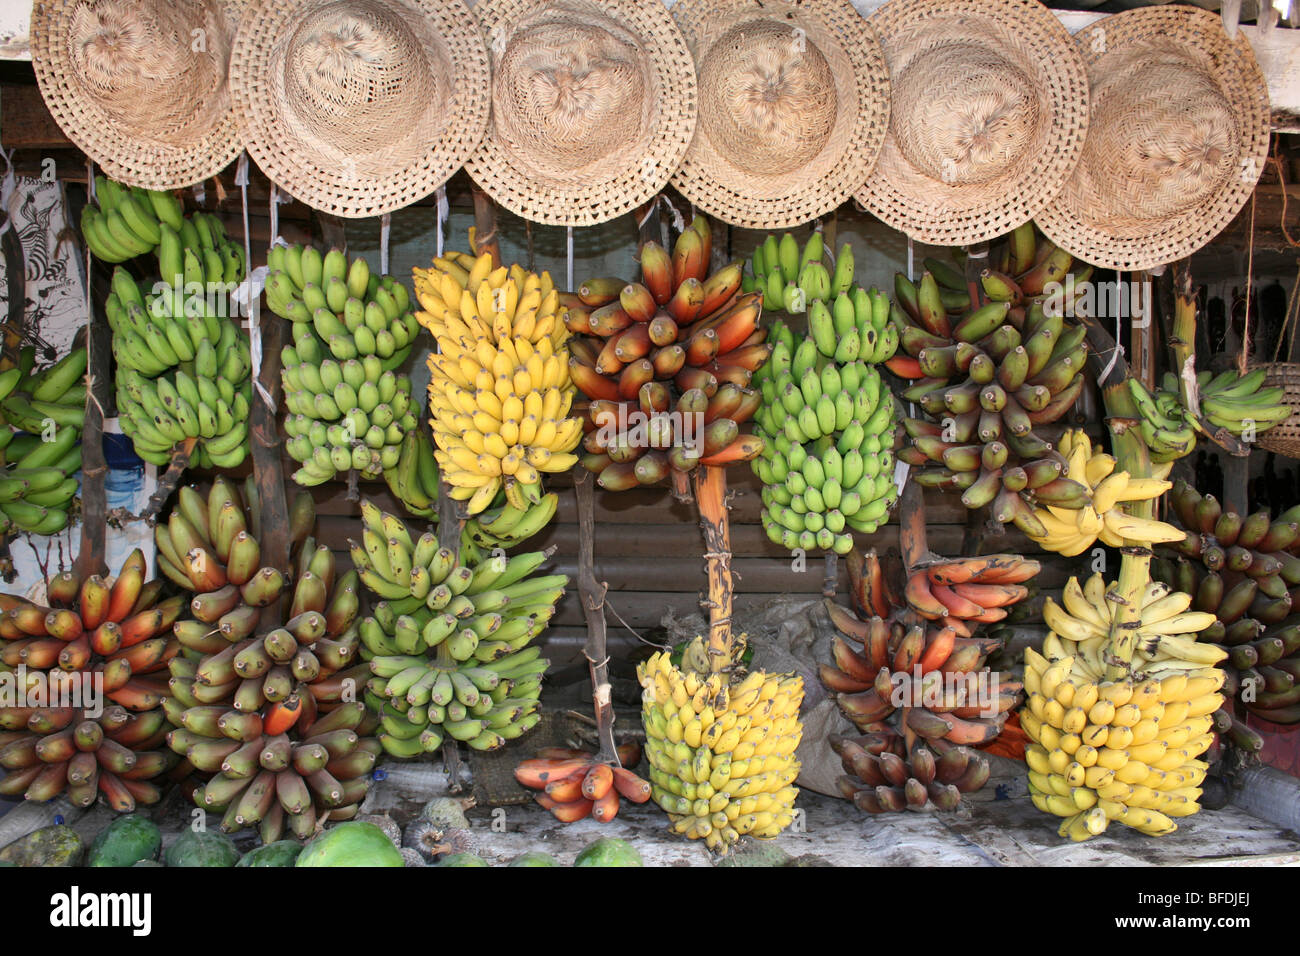 Bananas And Plantains For Sale On A Market Stall In Mto Wa Mbu, Tanzania Stock Photo